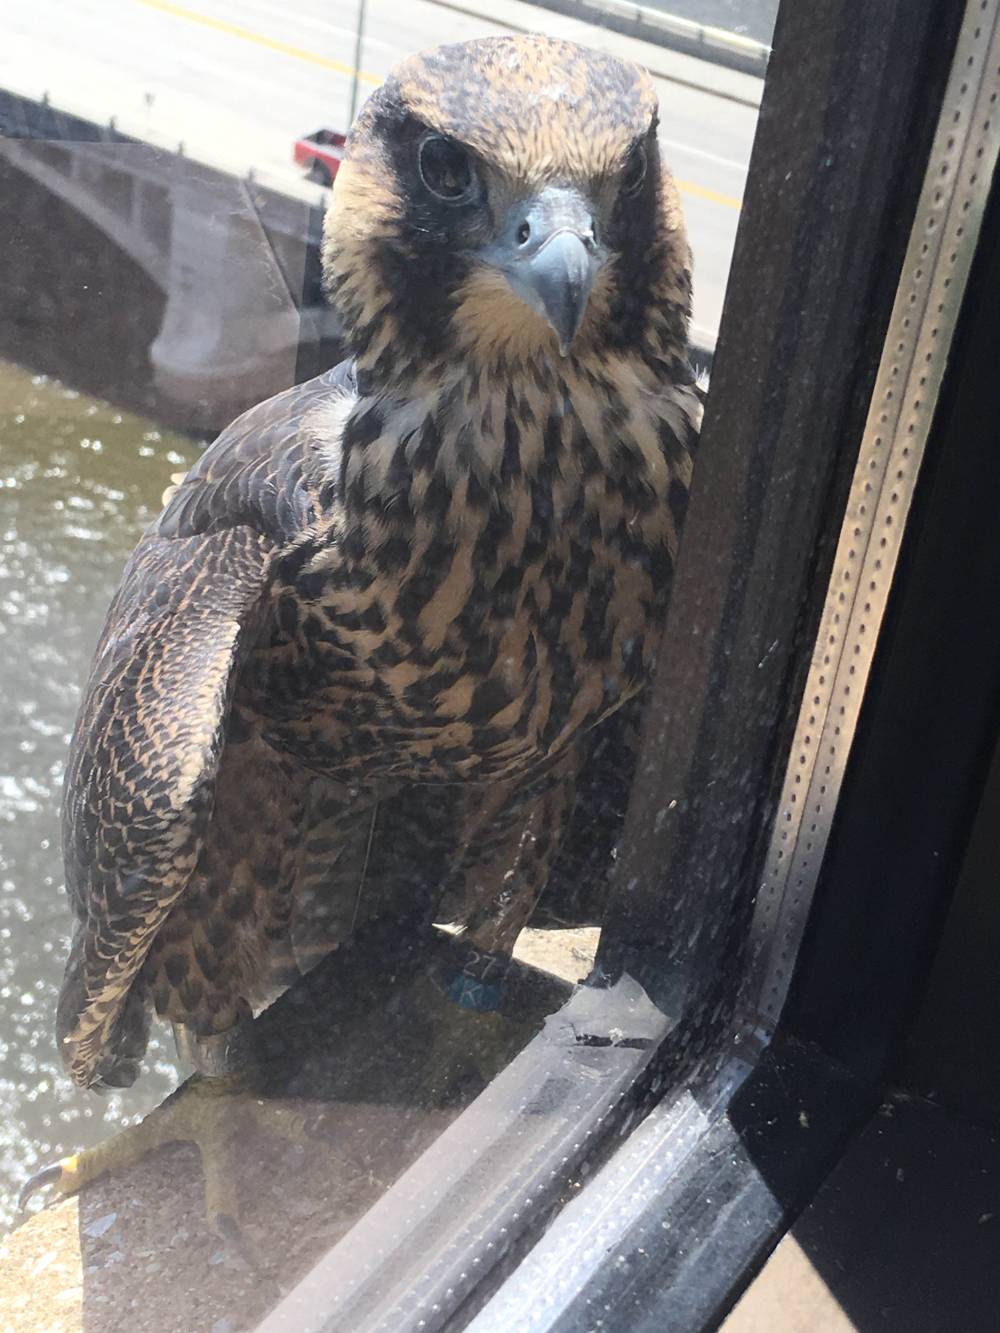 Peregrine falcon takes a brief rest from learning to fly on an Eberhard Center window ledge